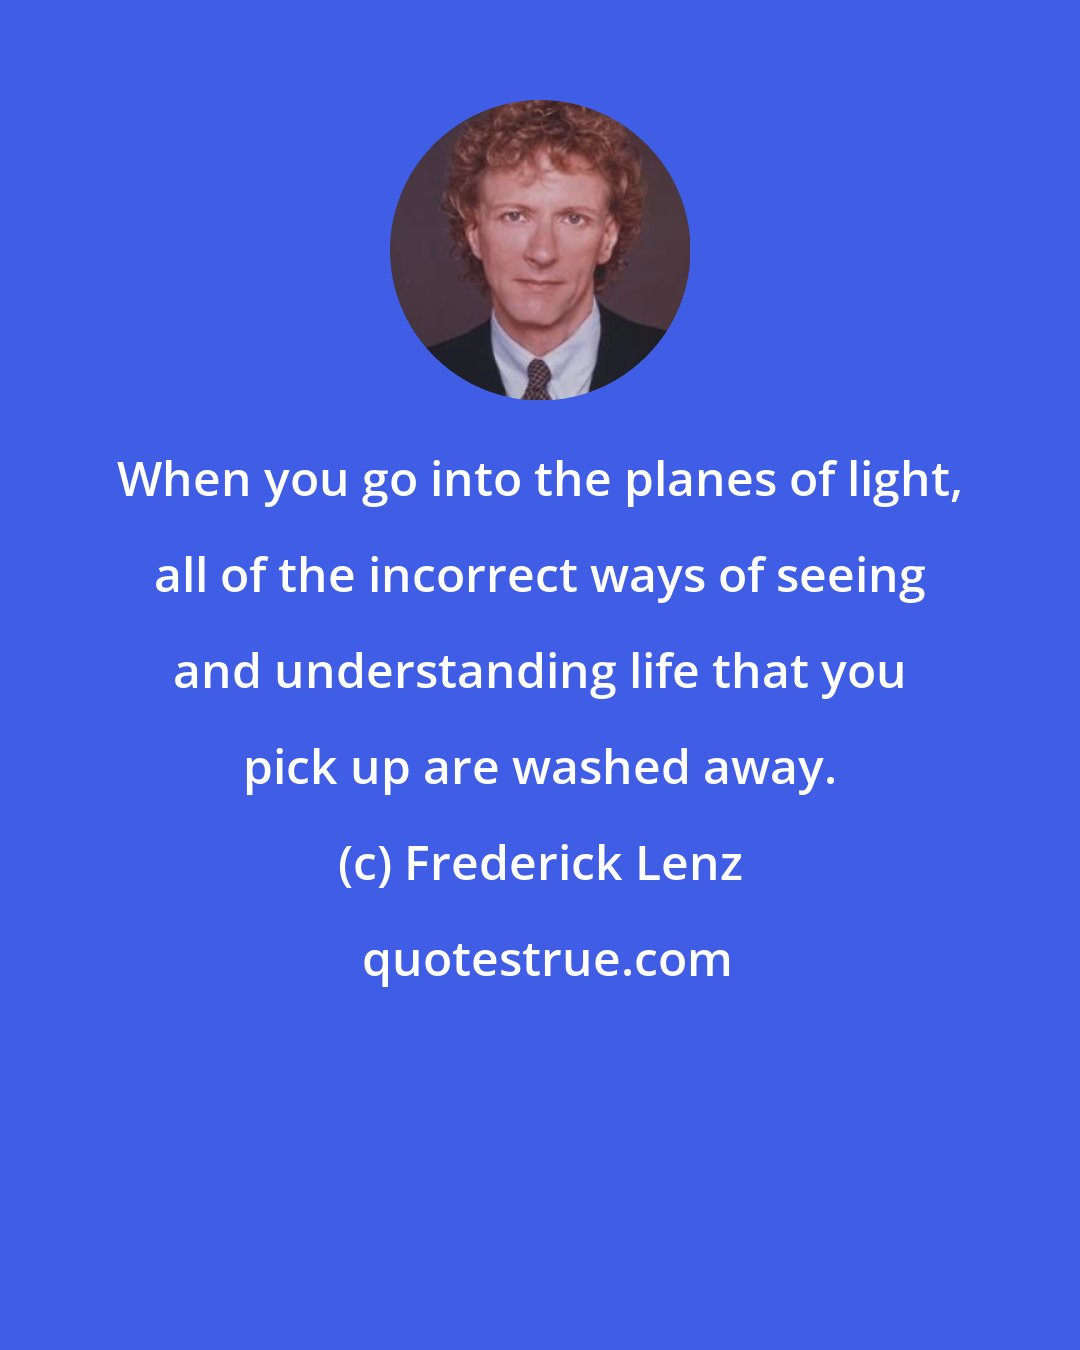 Frederick Lenz: When you go into the planes of light, all of the incorrect ways of seeing and understanding life that you pick up are washed away.